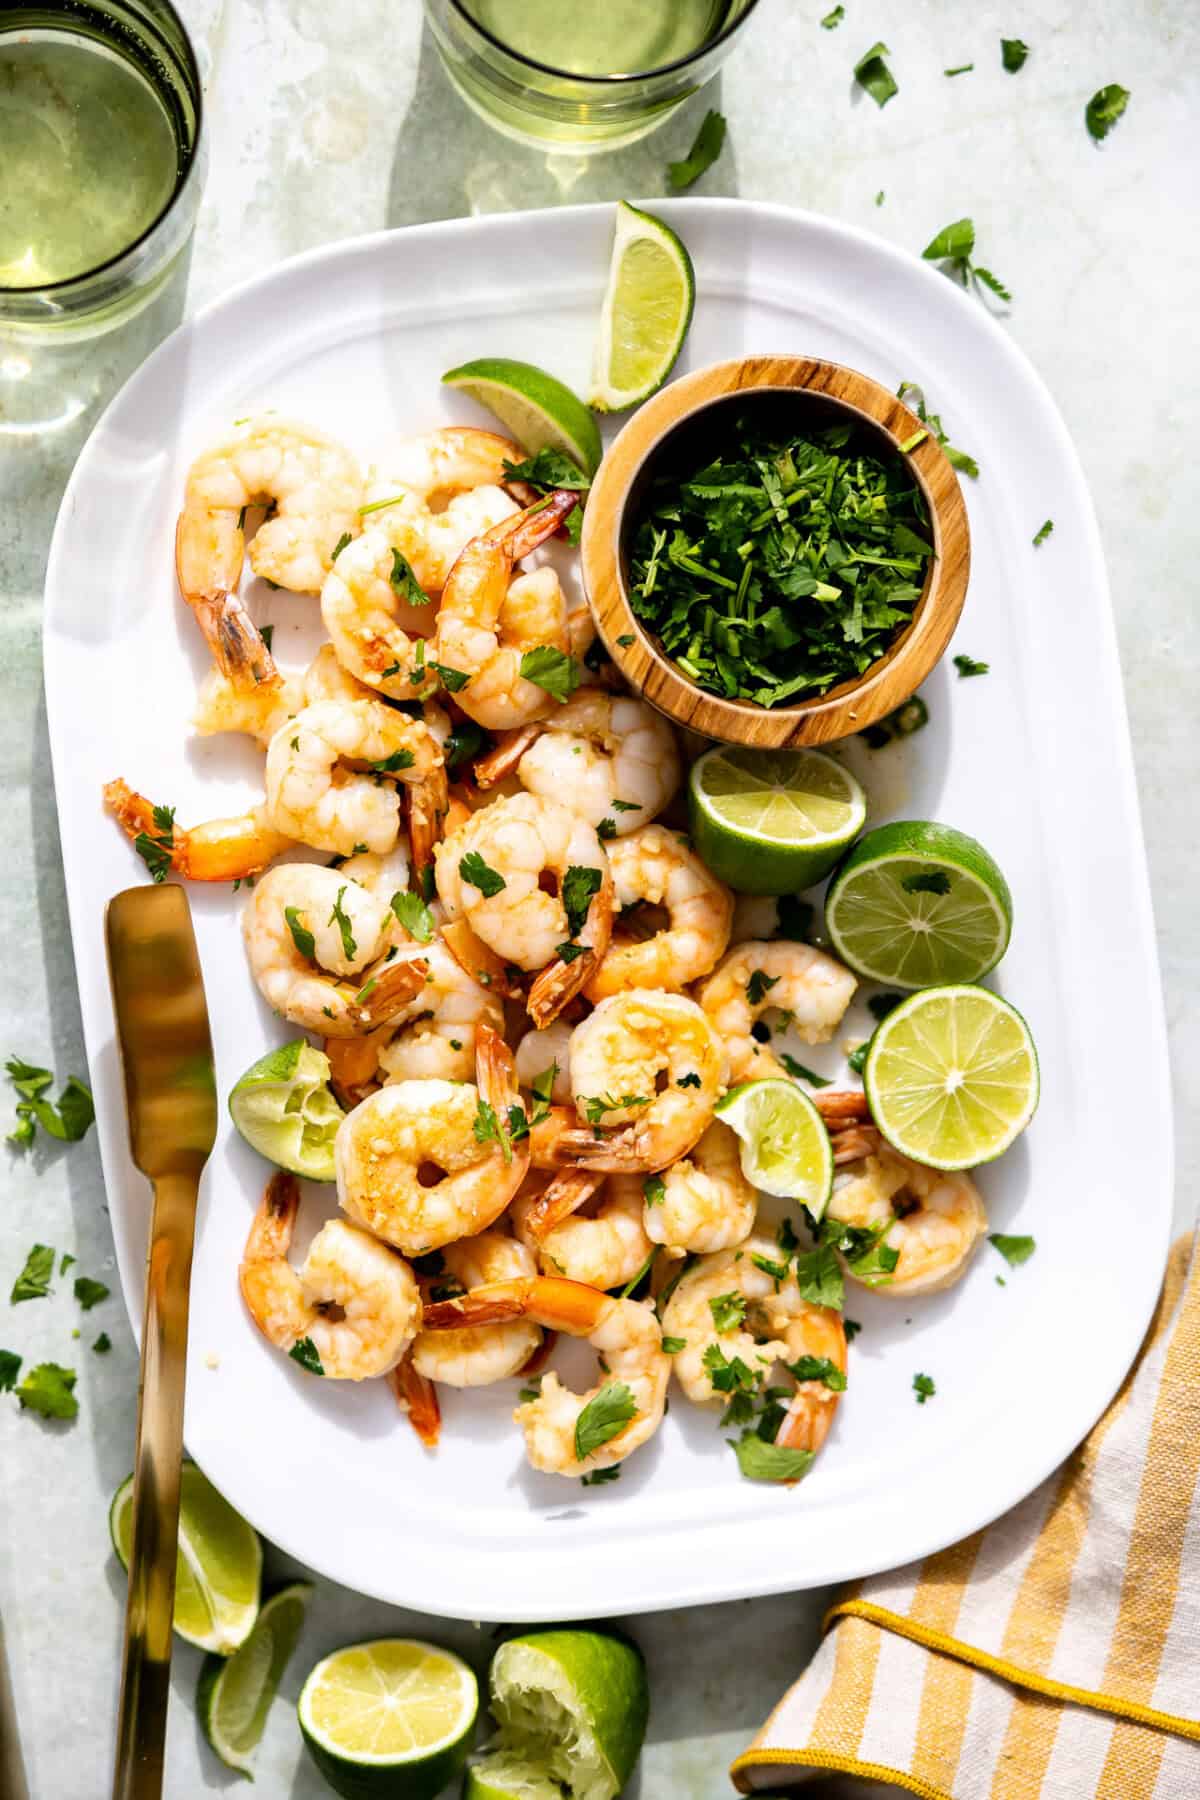 Plate filled with cilantro lime shrimp.